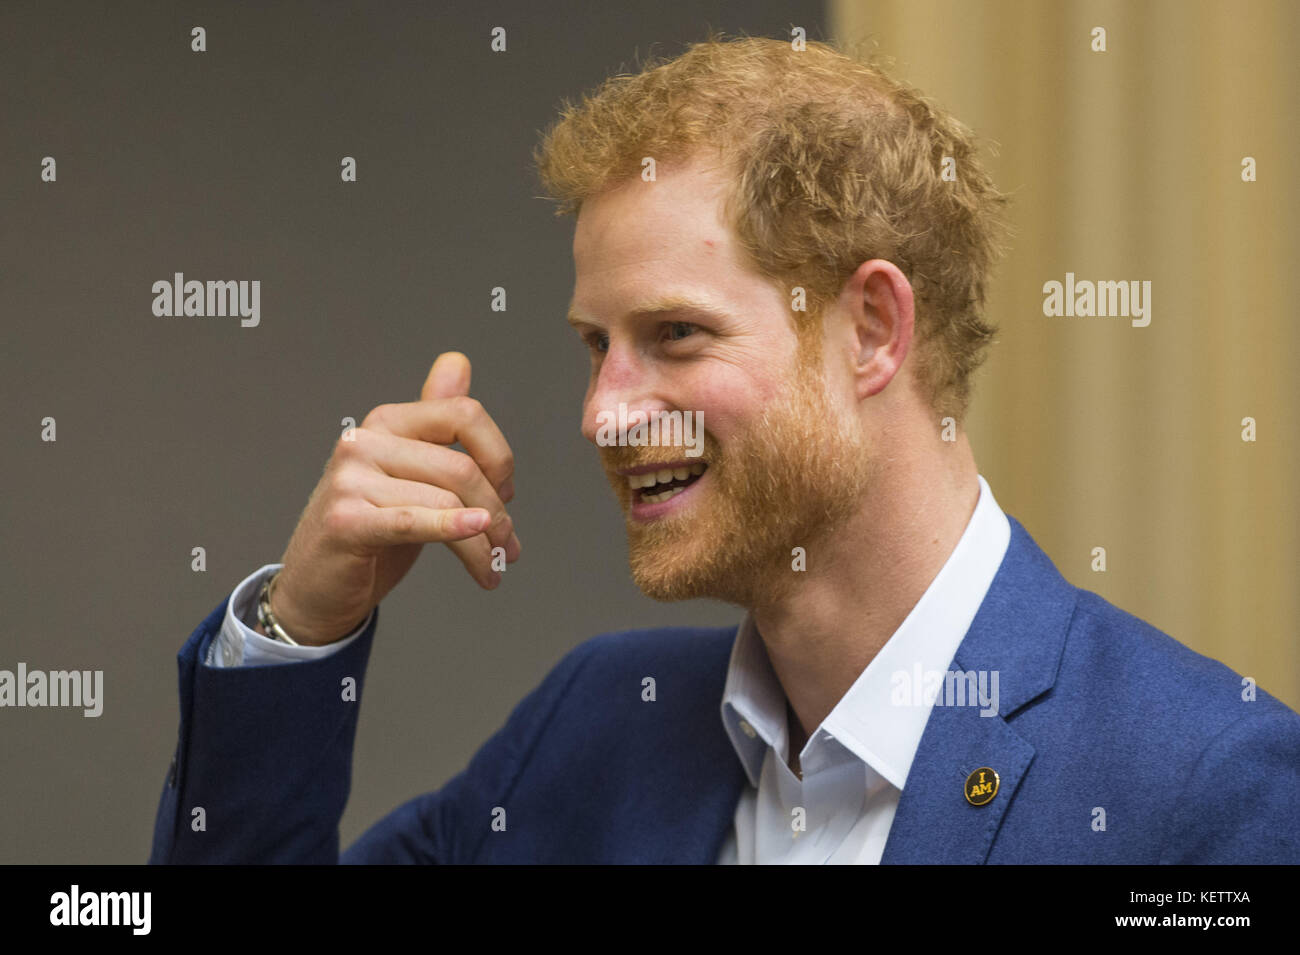 Prince Harry attends True Patriot Love Symposium, at the Scotia Plaza in Toronto.  Featuring: Prince Harry Where: Toronto, Canada When: 22 Sep 2017 Credit: Euan Cherry/WENN.com Stock Photo